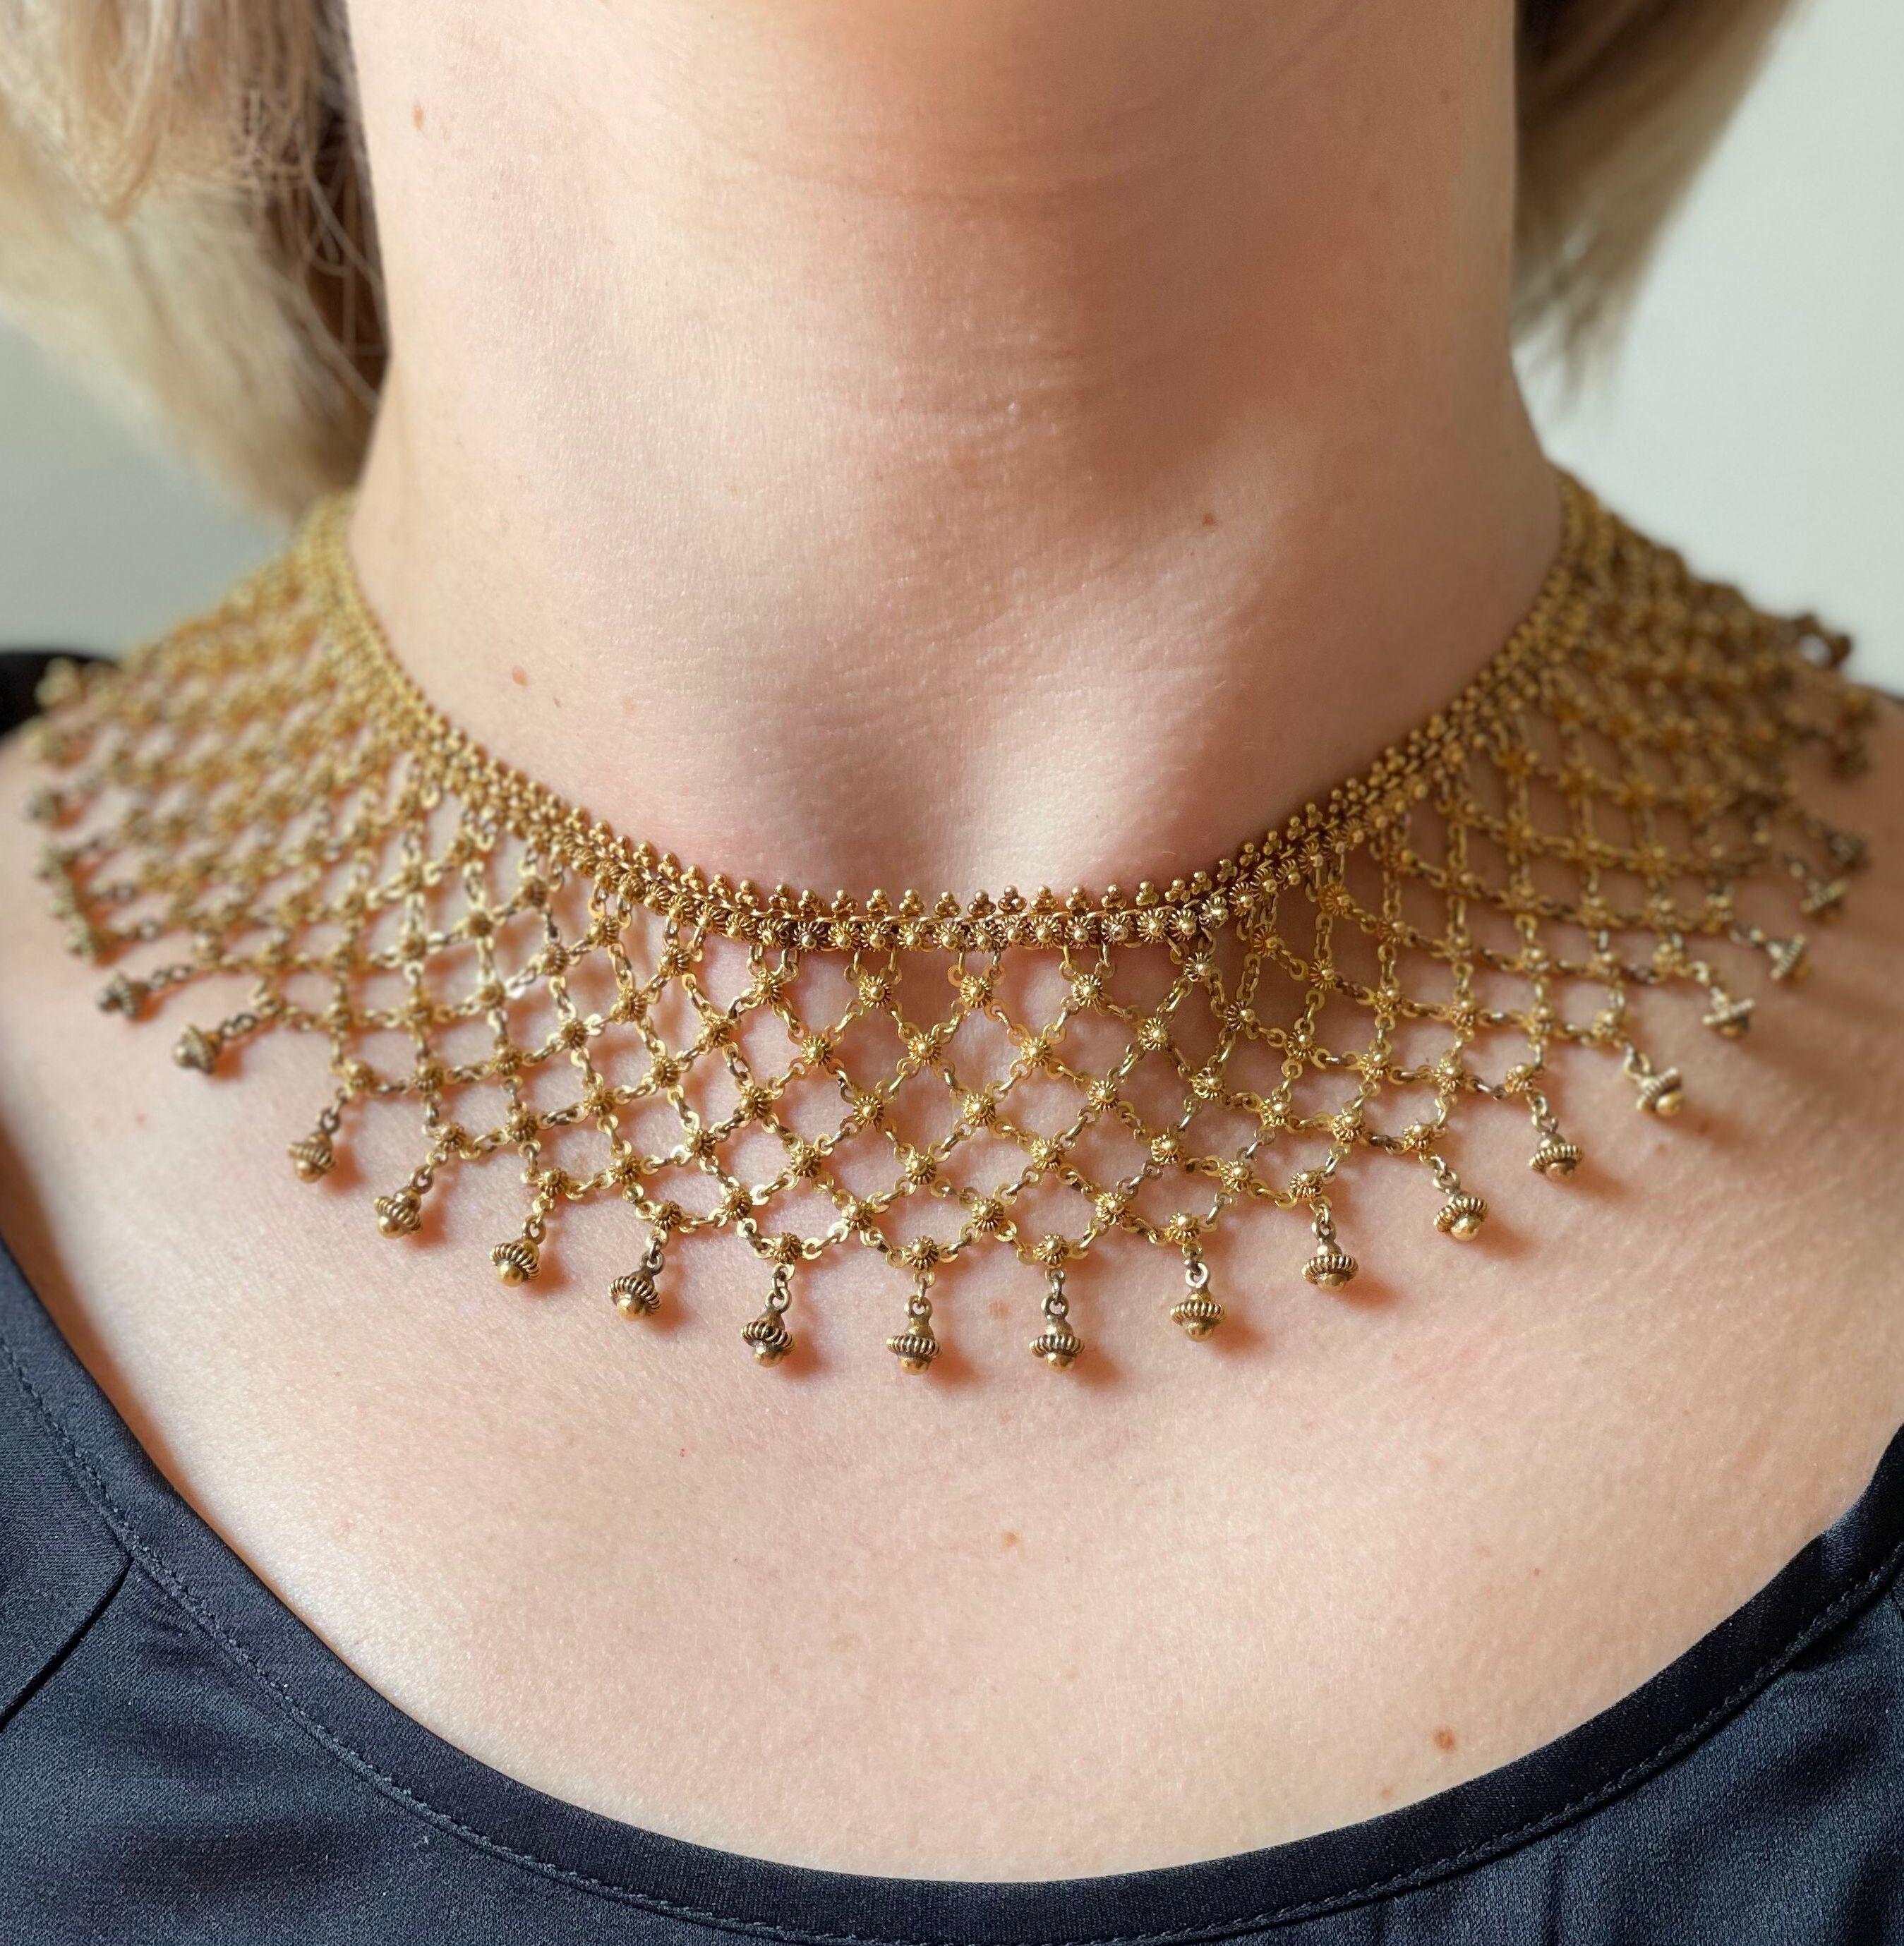 Antique Victorian mesh bib necklace in 18k gold. The necklace is measuring 16.5